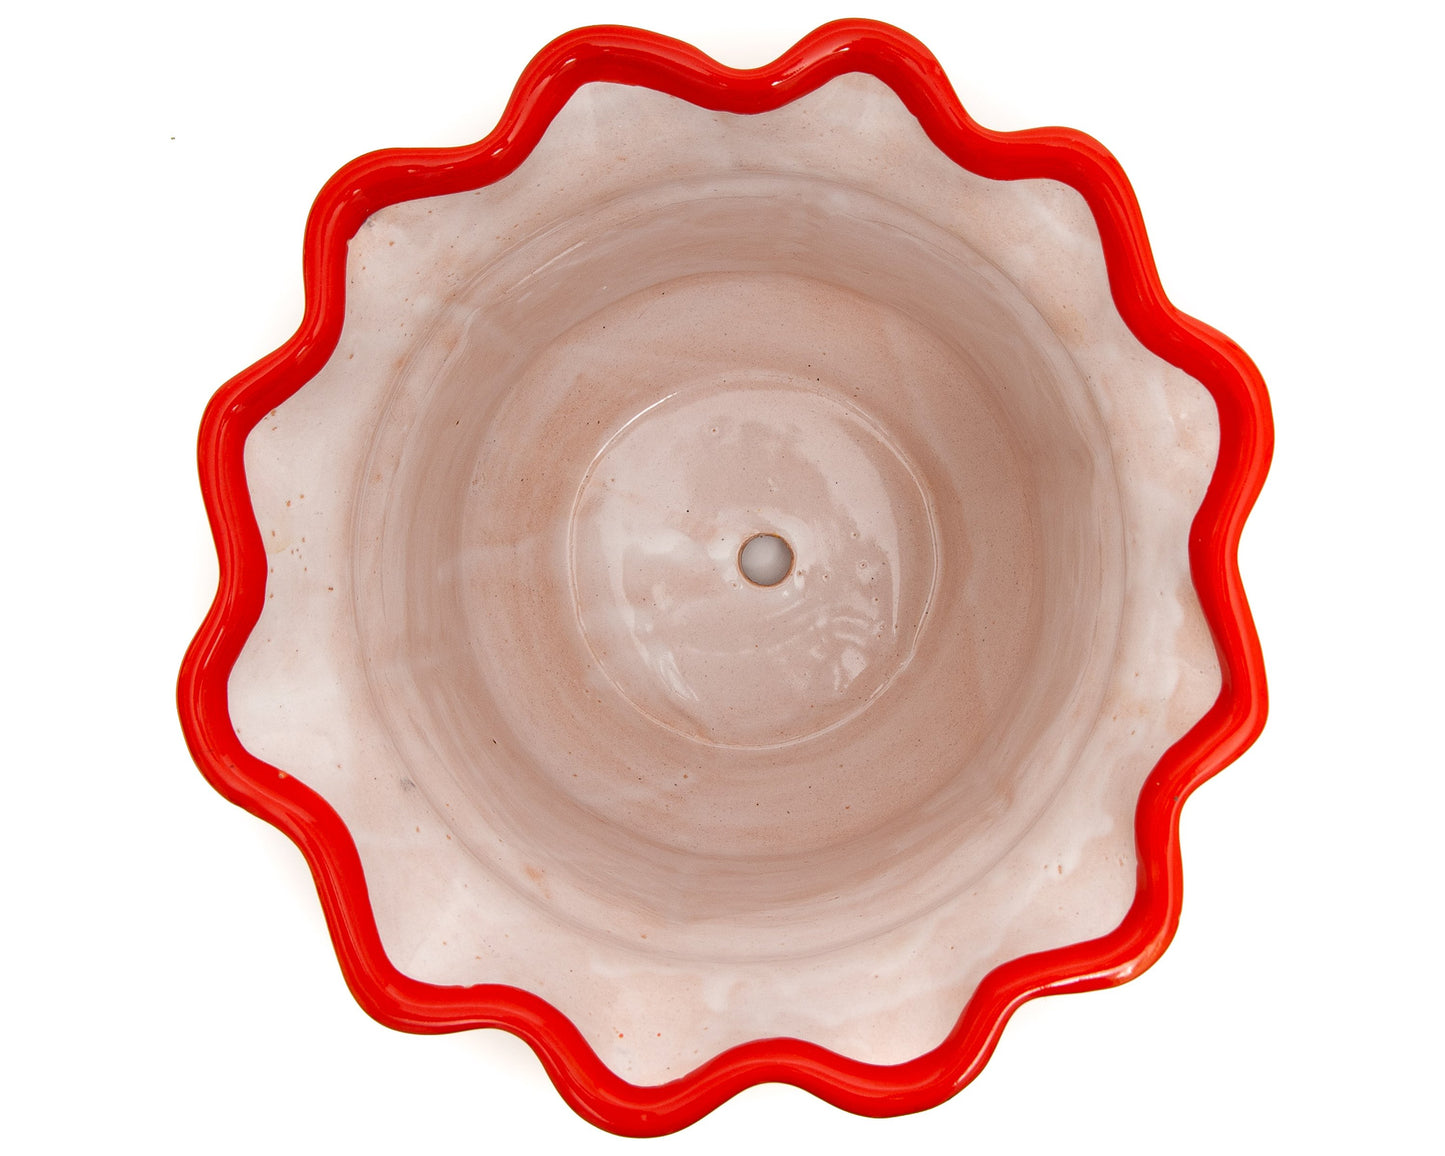 Scalloped Planter - Large - Red